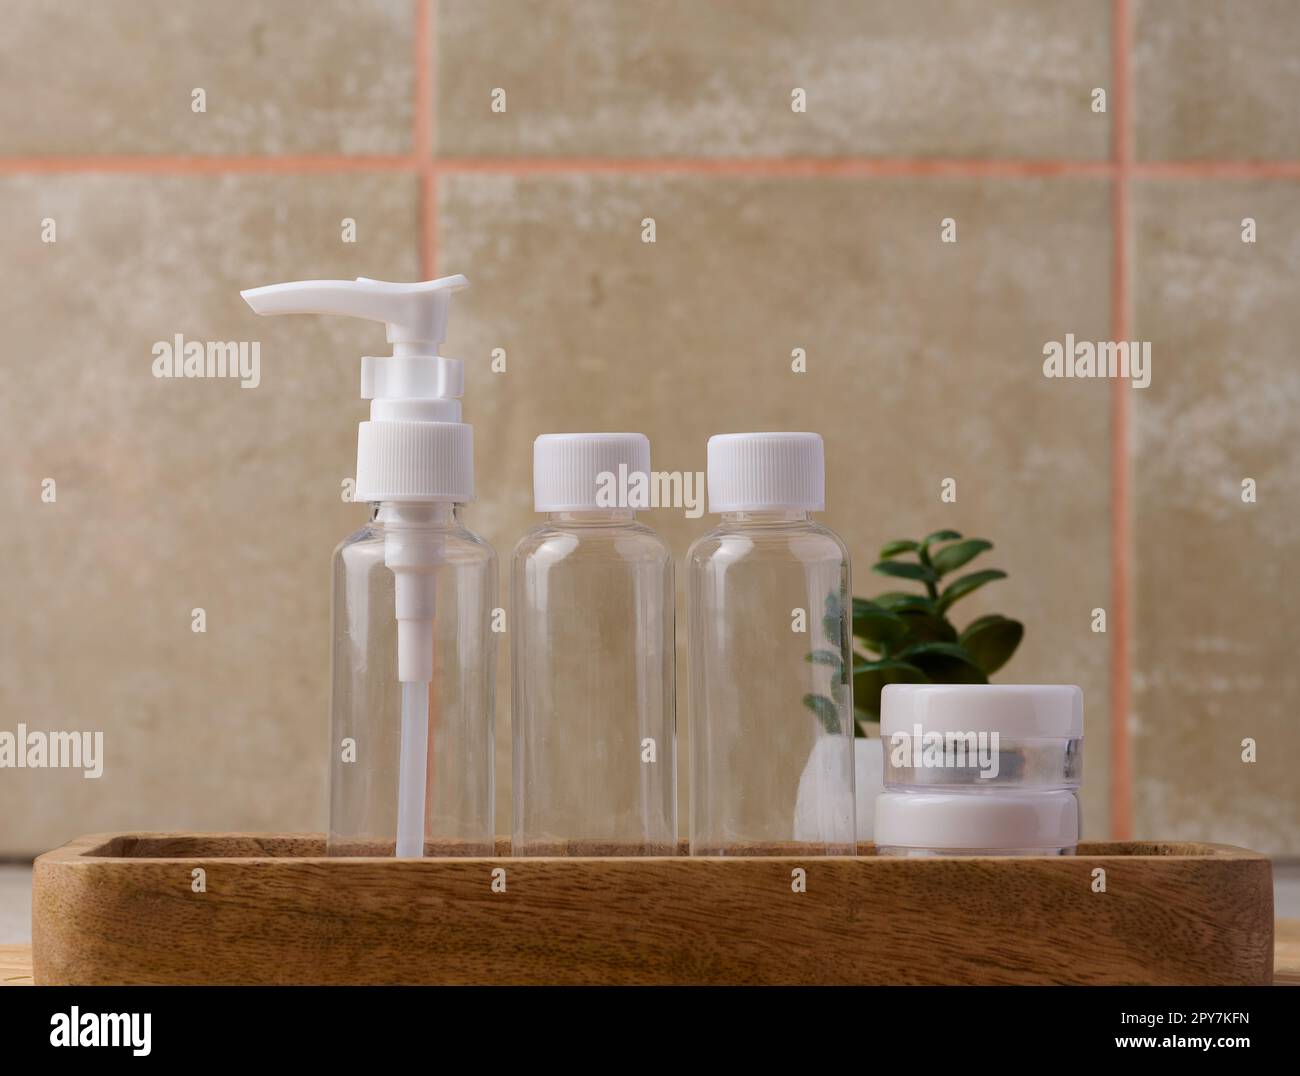 Transparent plastic container for cosmetics on the table, bottles for liquid cosmetics Stock Photo